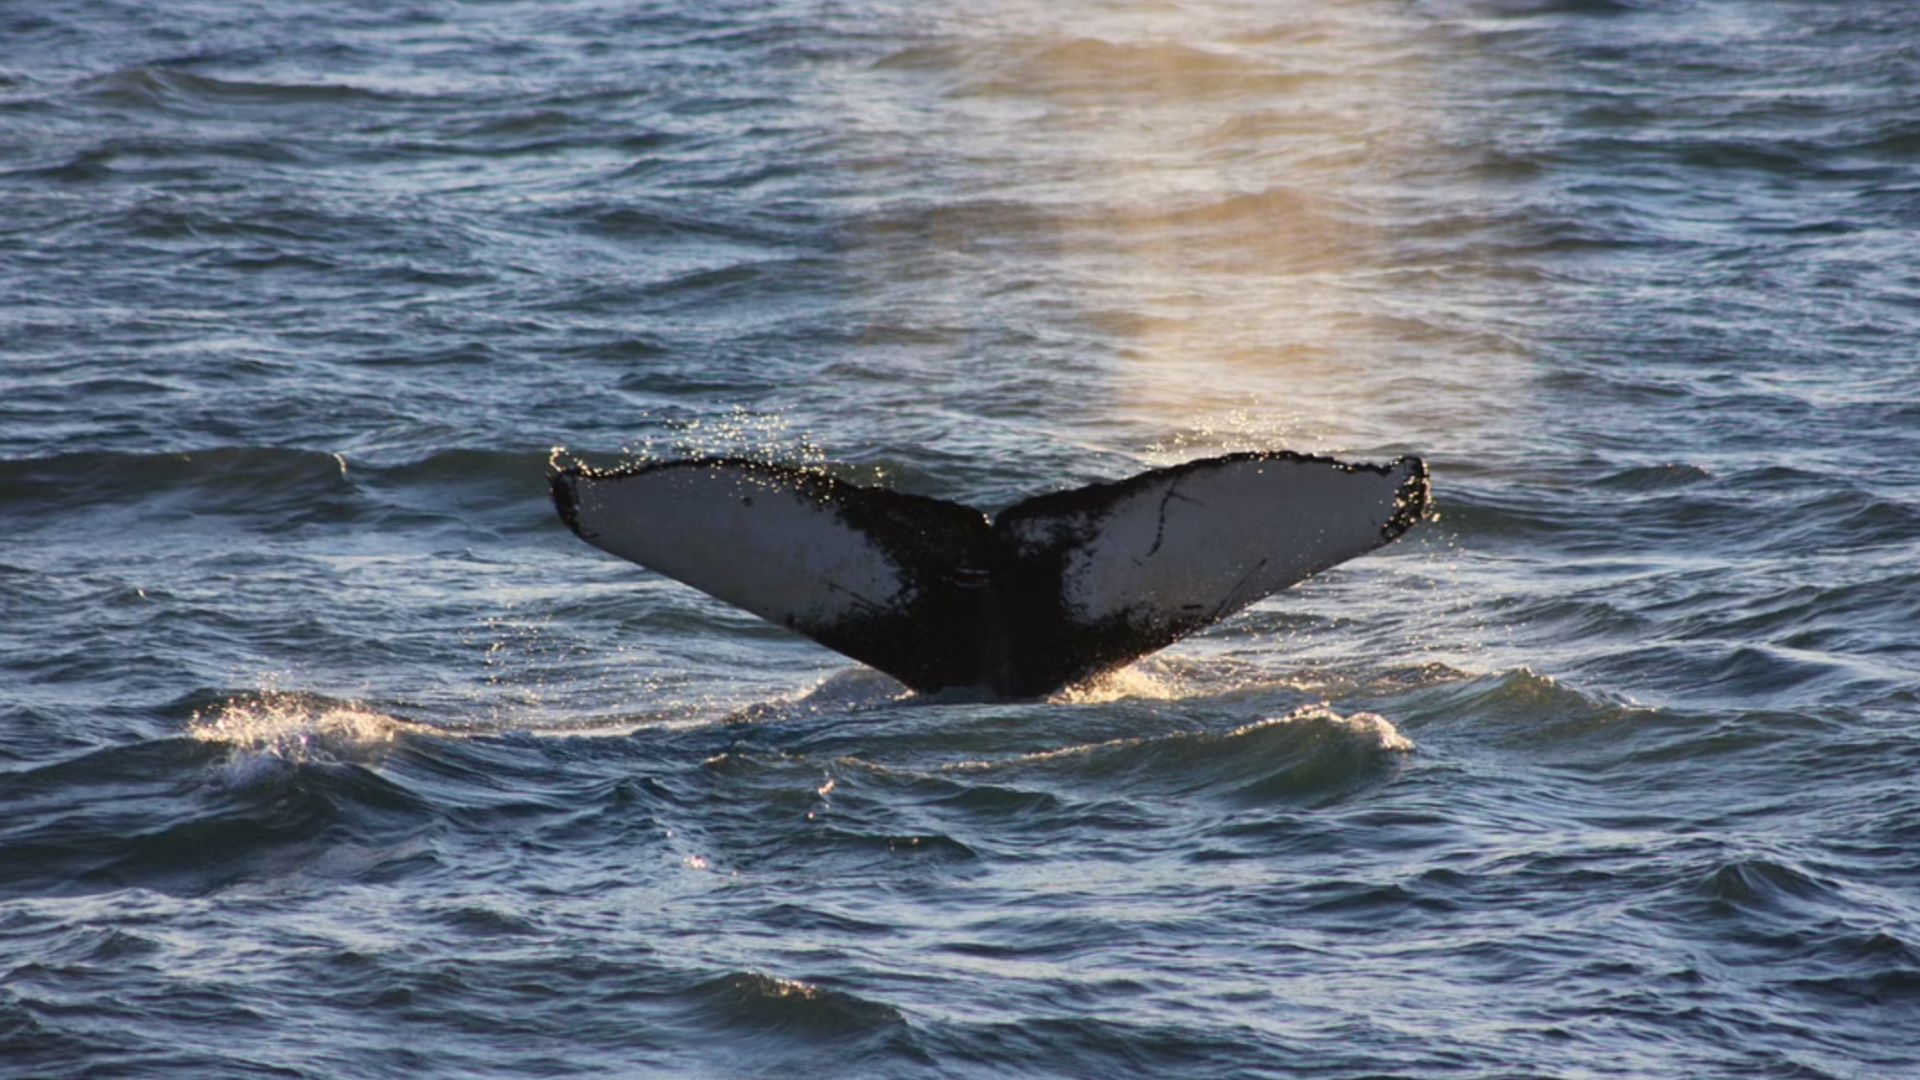 Whale's tail during the whale watching tour in Iceland